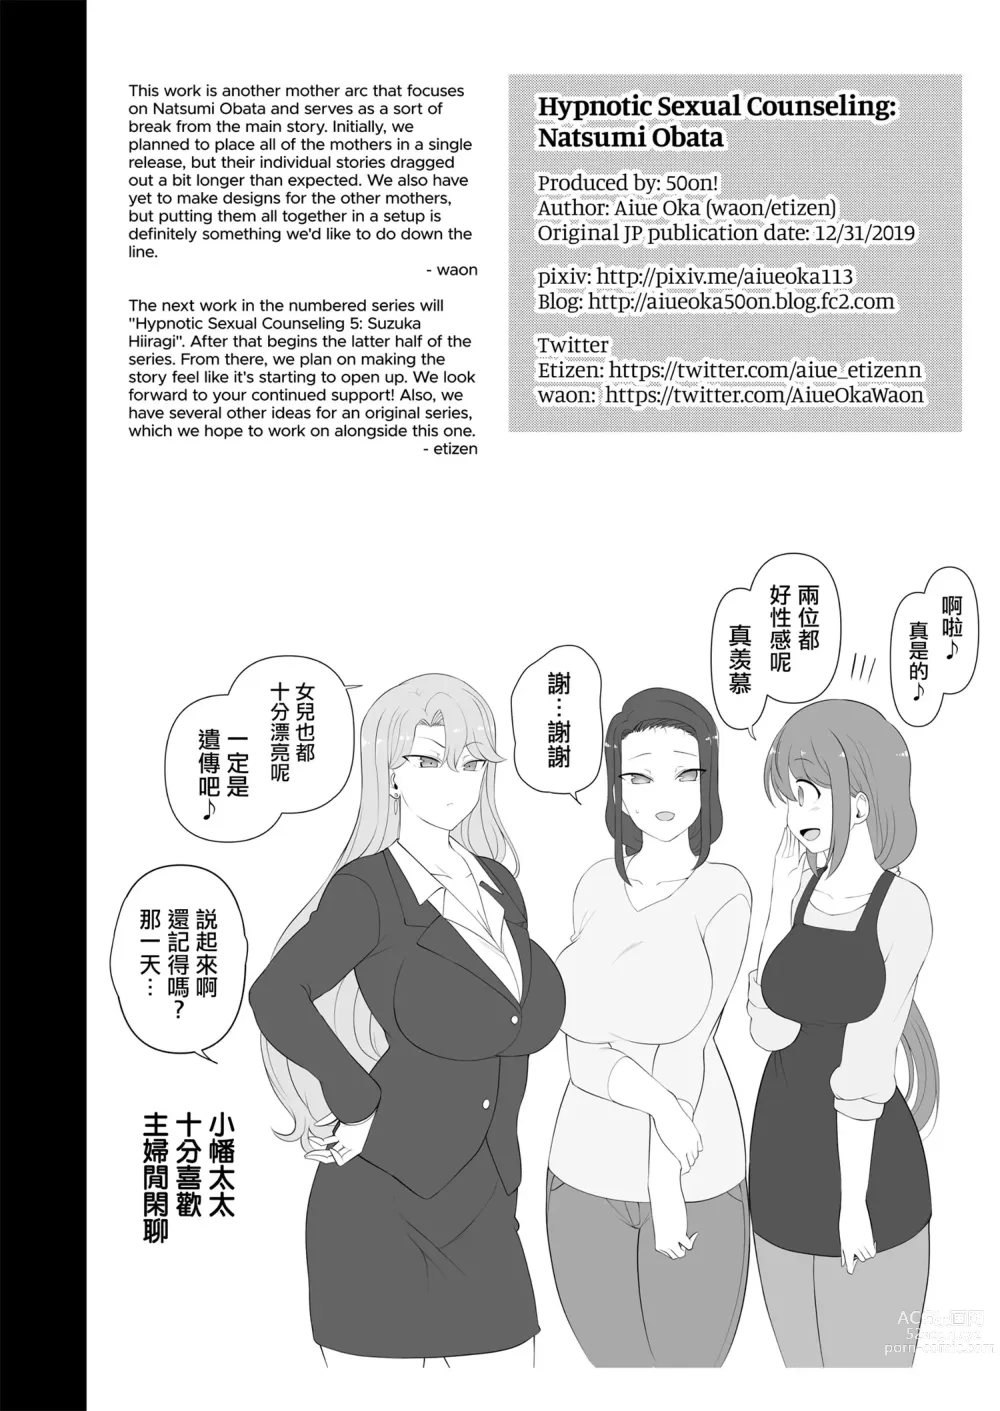 Page 410 of doujinshi mind control sex Guide